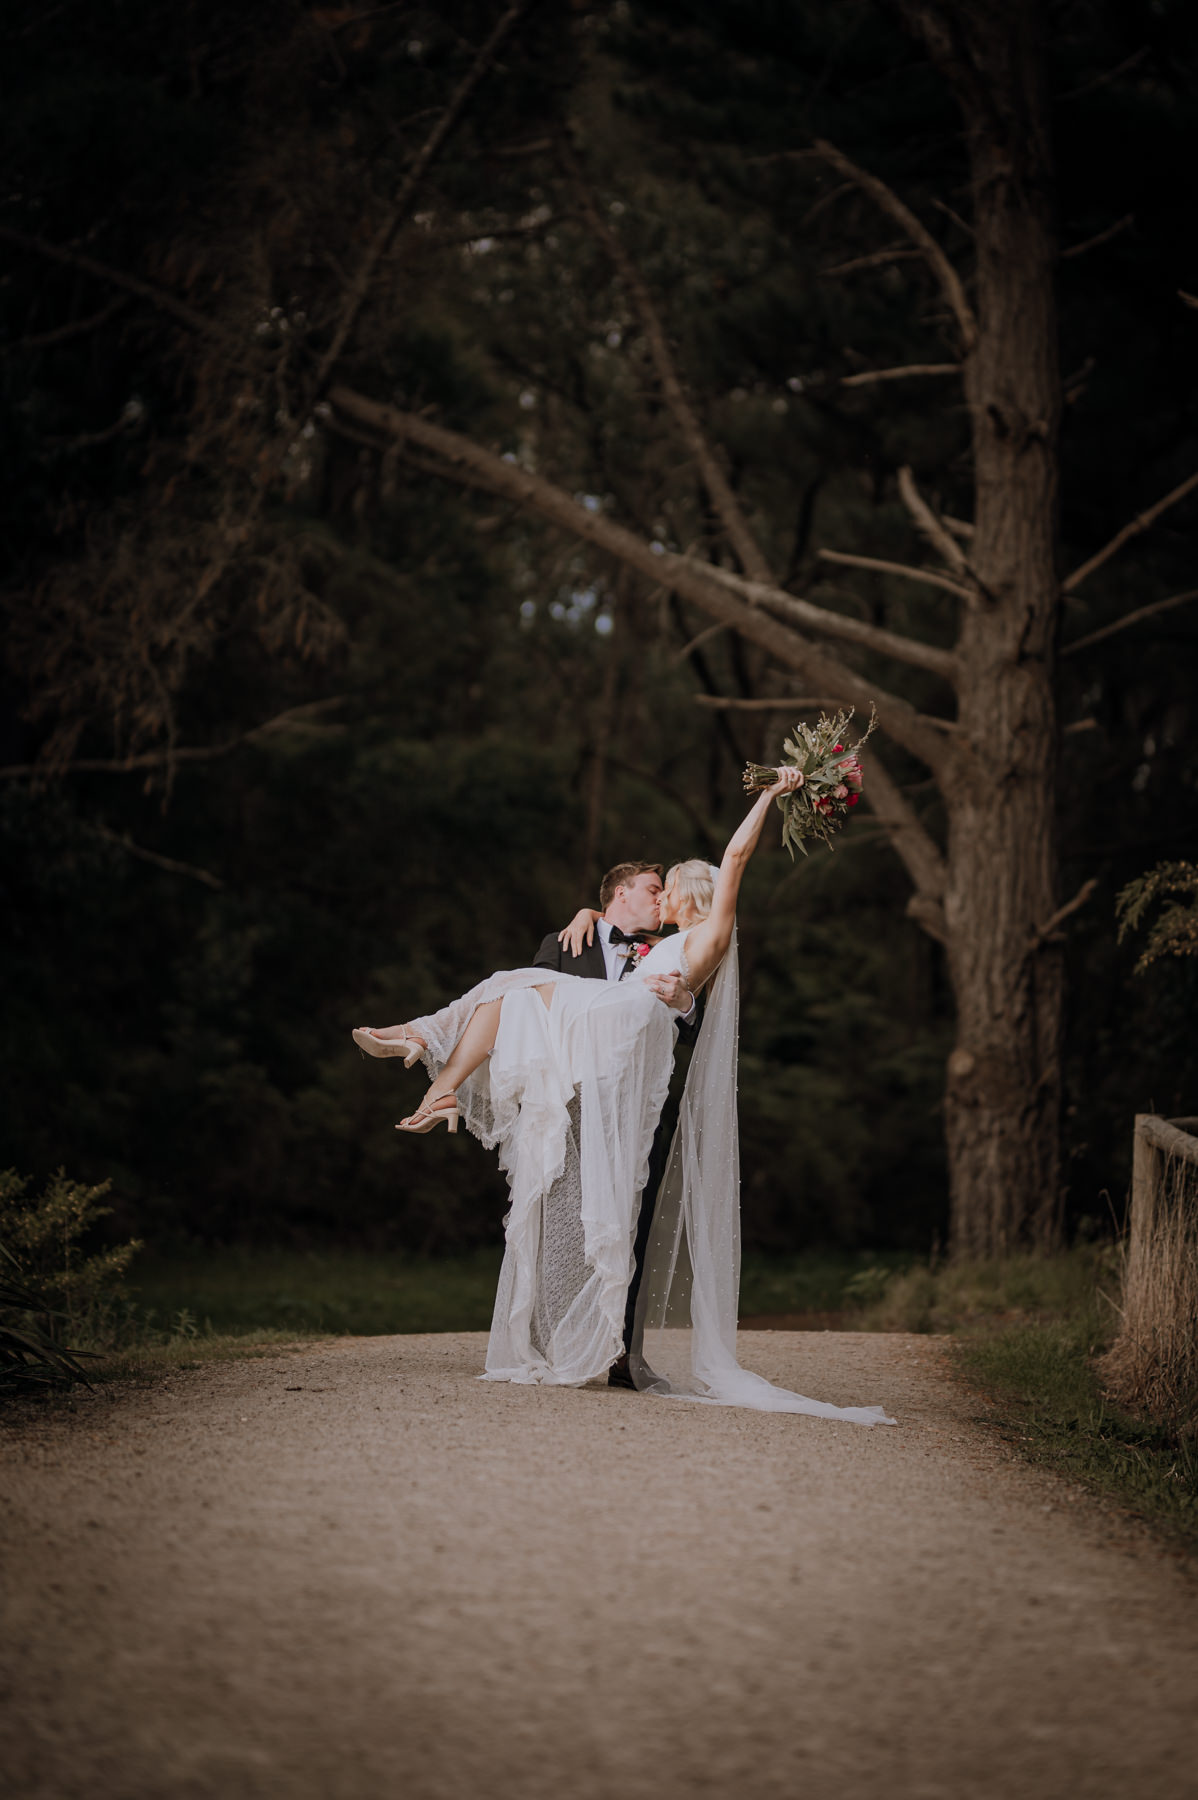 Image from a Mornington Peninsula Wedding with the Groom carrying bride on a path in the forest, bride is kissing groom with bouquet raised in the air.